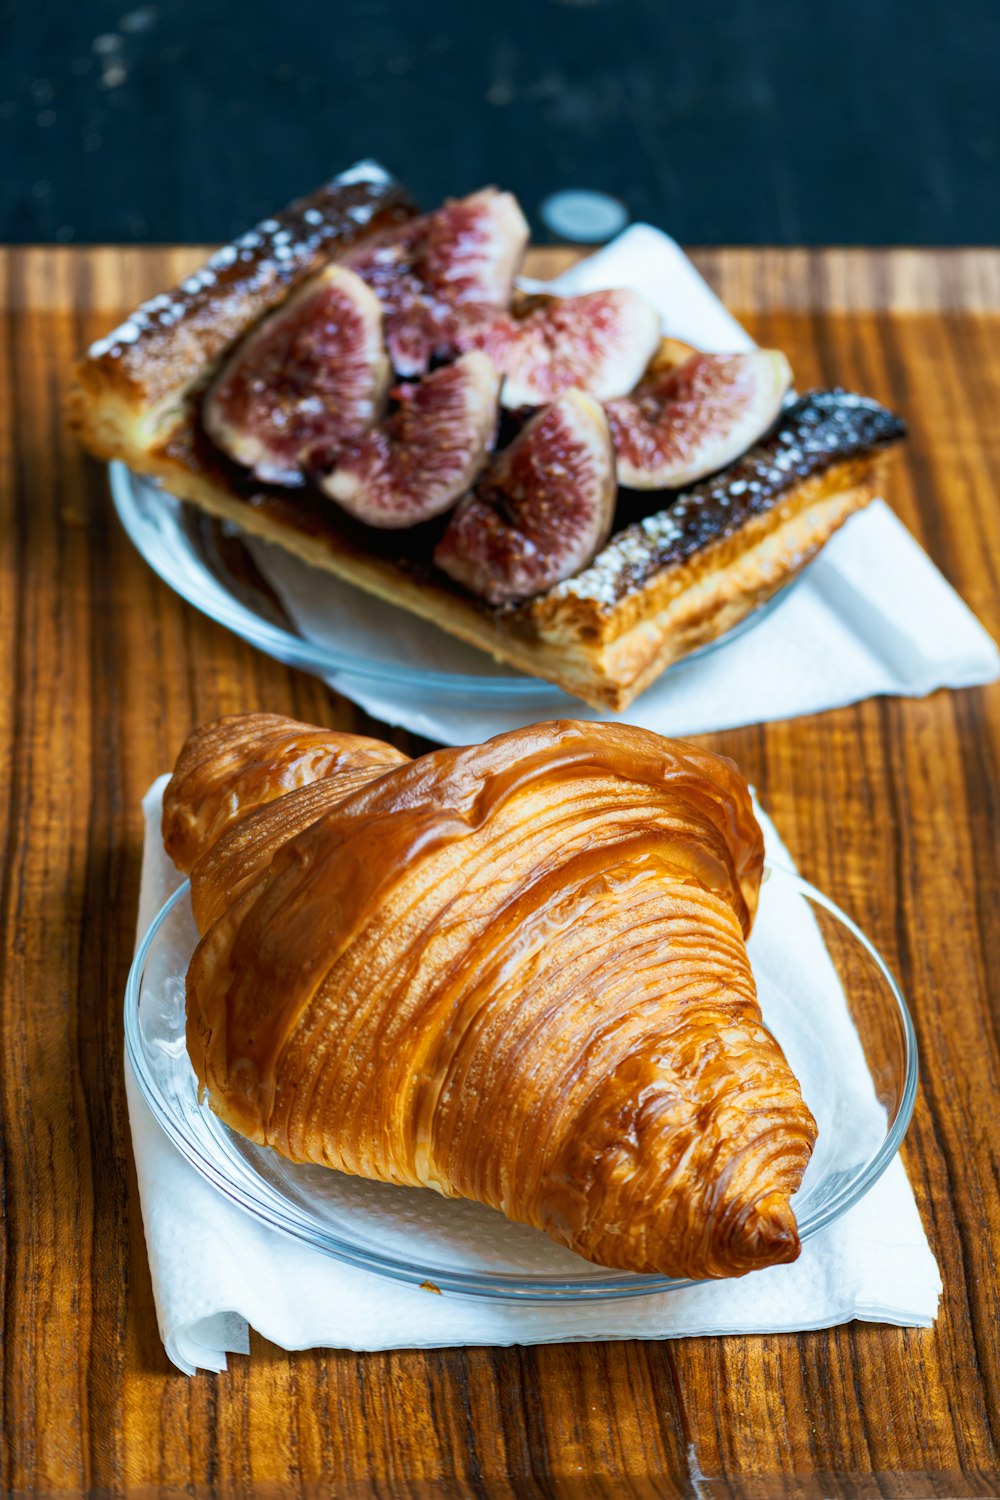 a croissant on a plate next to a pastry on a plate